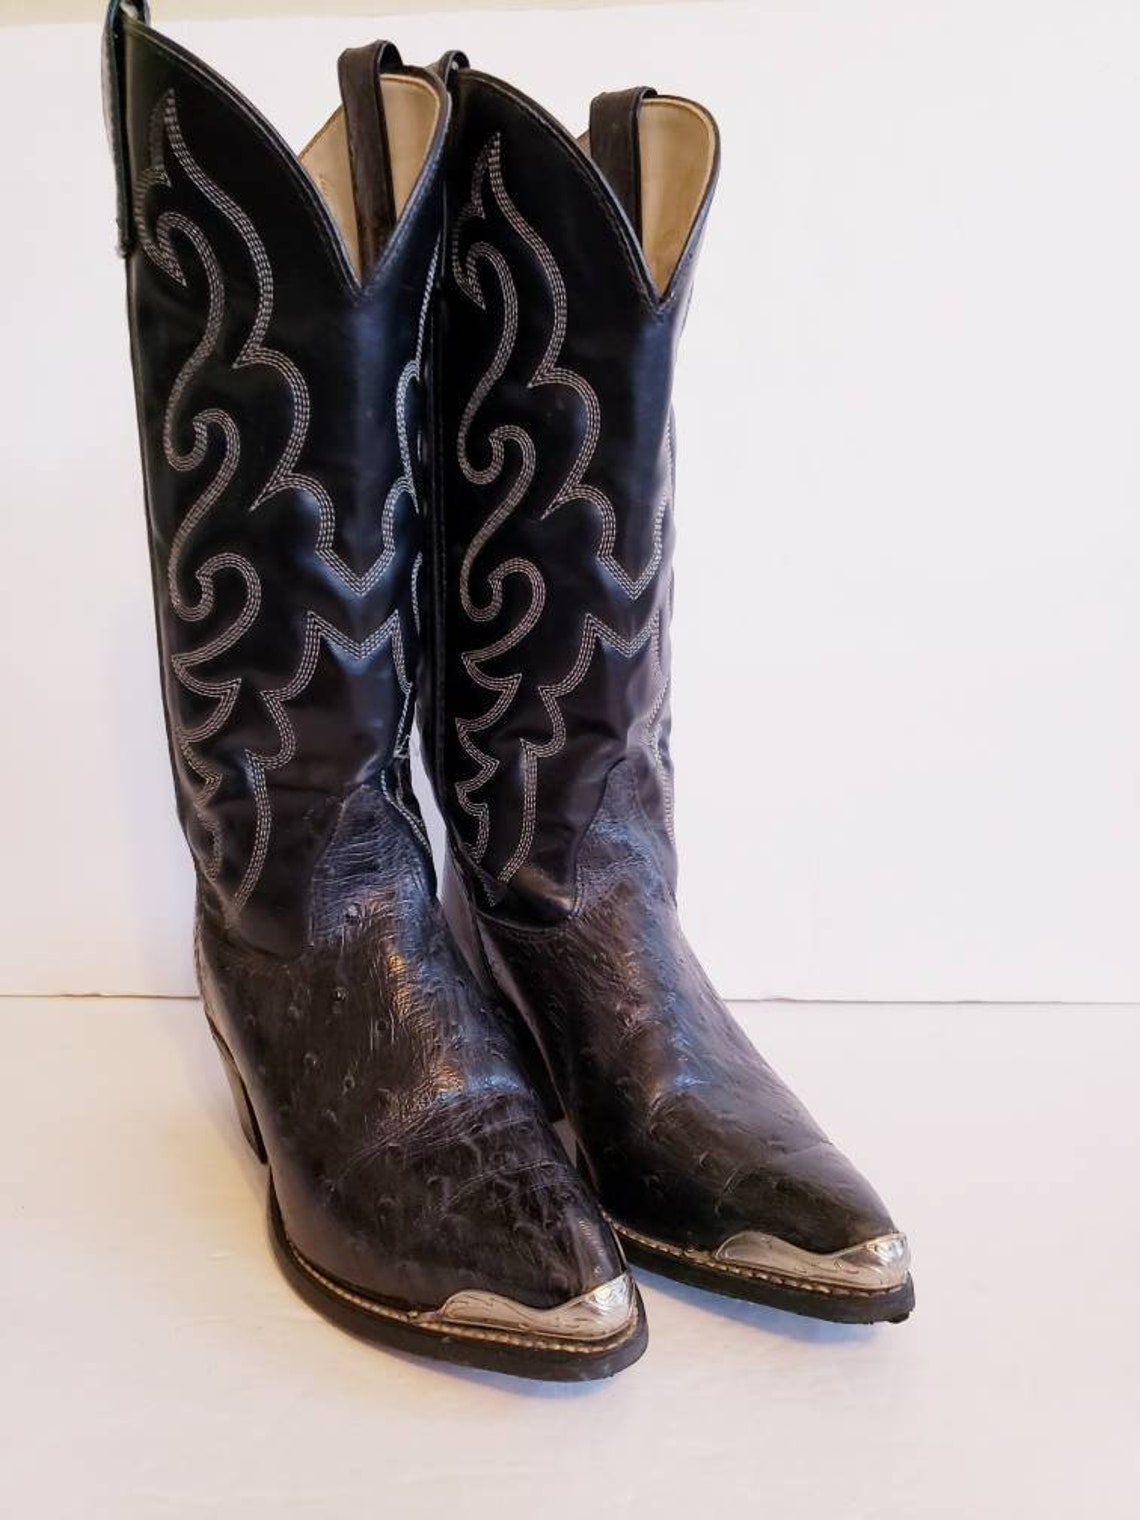 Vintage Black Tooled Leather Ostrich Cowboy Boots by Texas / | Etsy